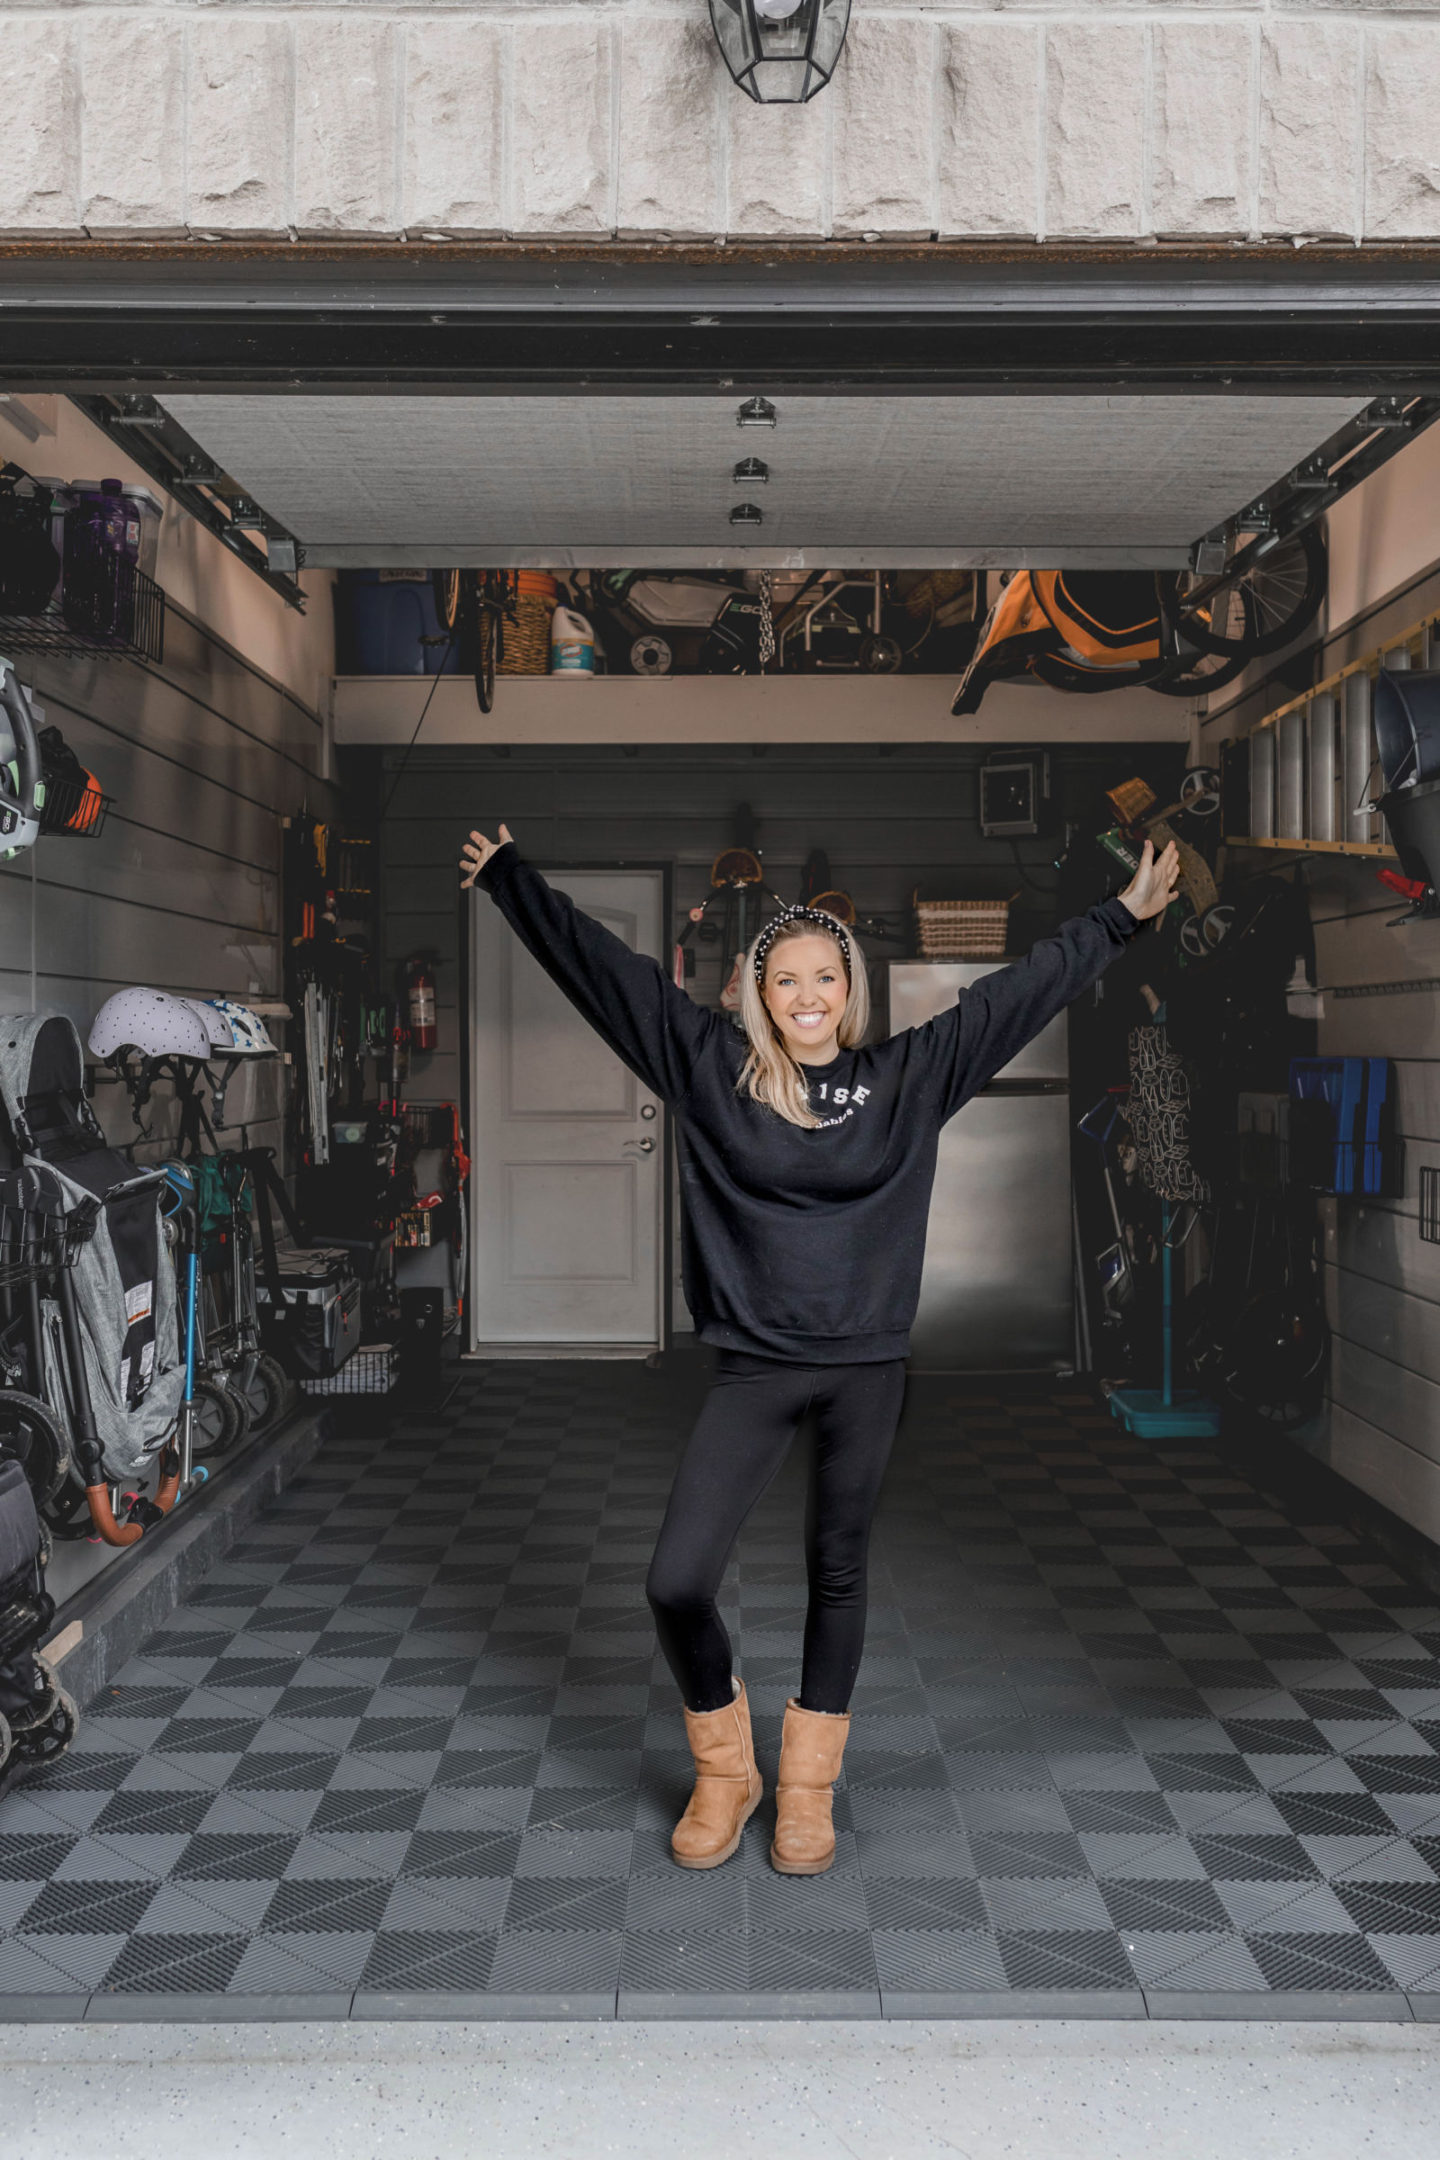 Our Garage Makeover with Mint Garage